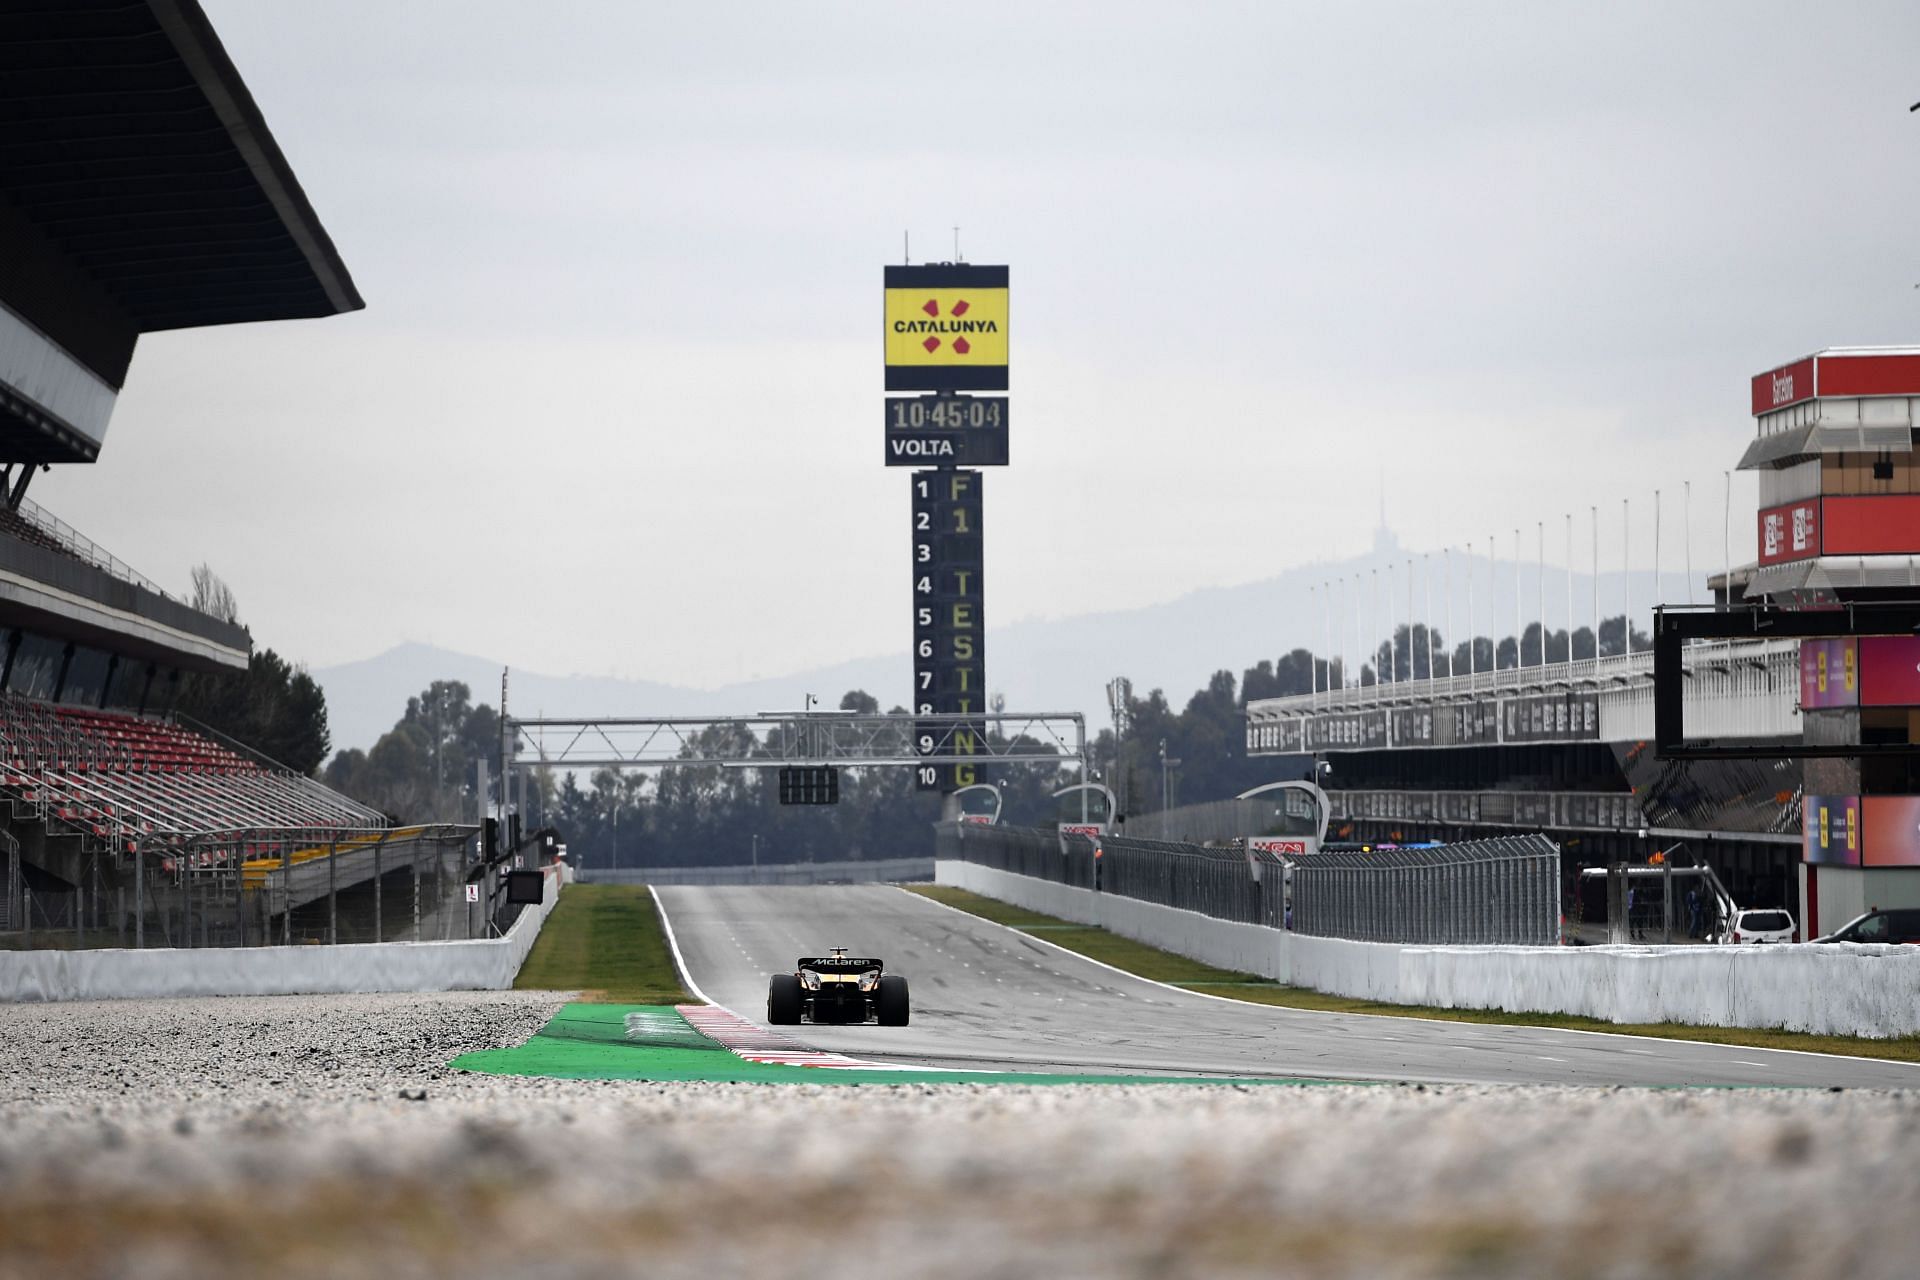 The Circuit de Barcelona-Catalunya during Day 3 of 2022 F1 pre-season testing (Photo by Rudy Carezzevoli/Getty Images)